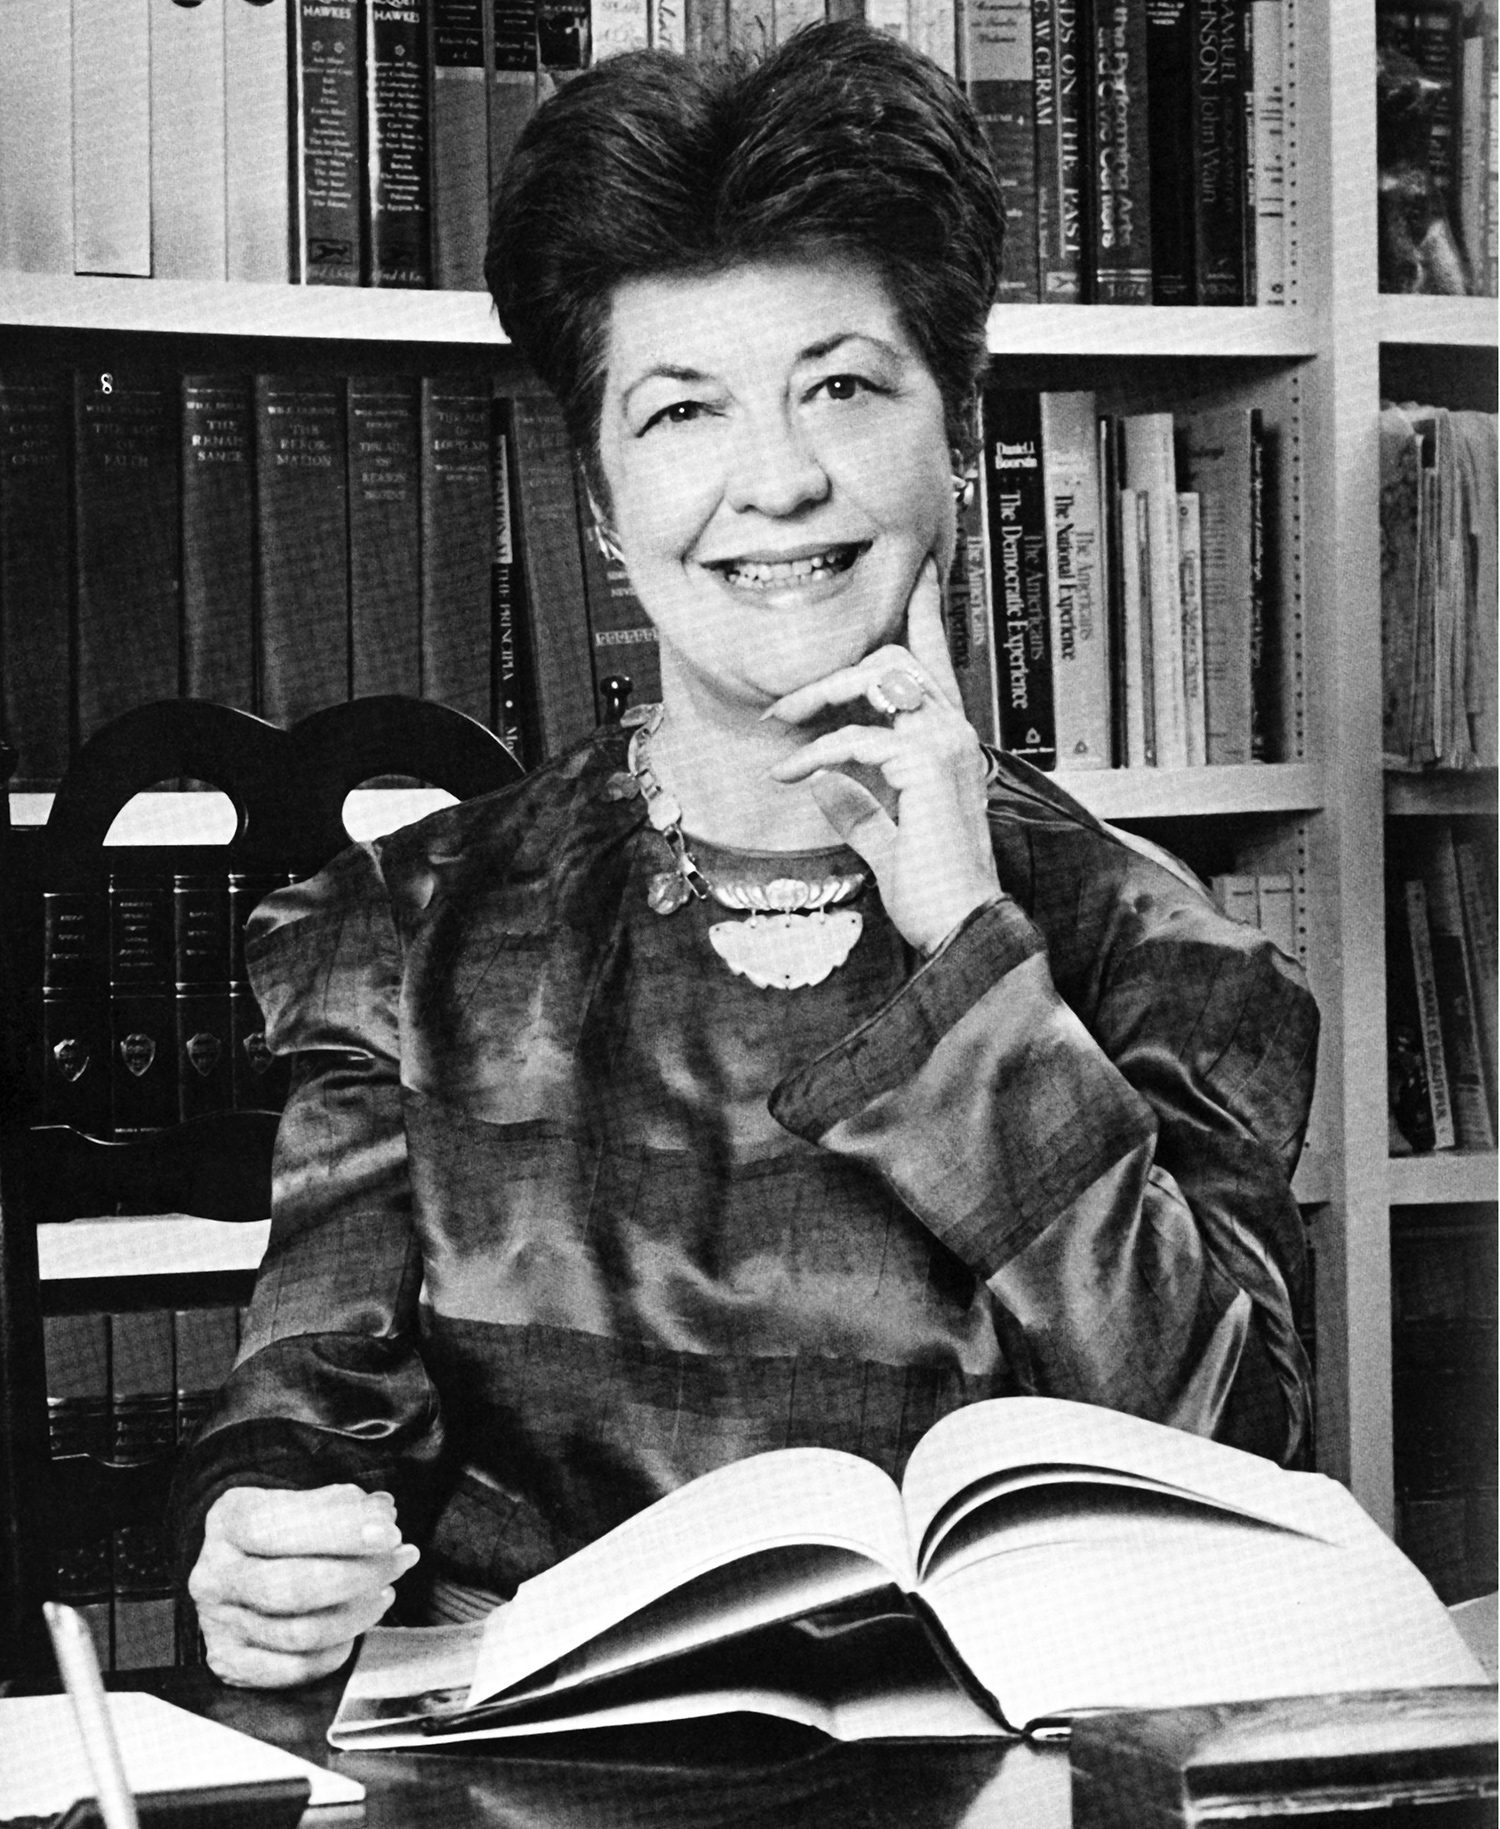 A black and white photograph of a smiling woman in business attire sitting at a desk with an open book. A bookshelf filled with books is seen in the background. 